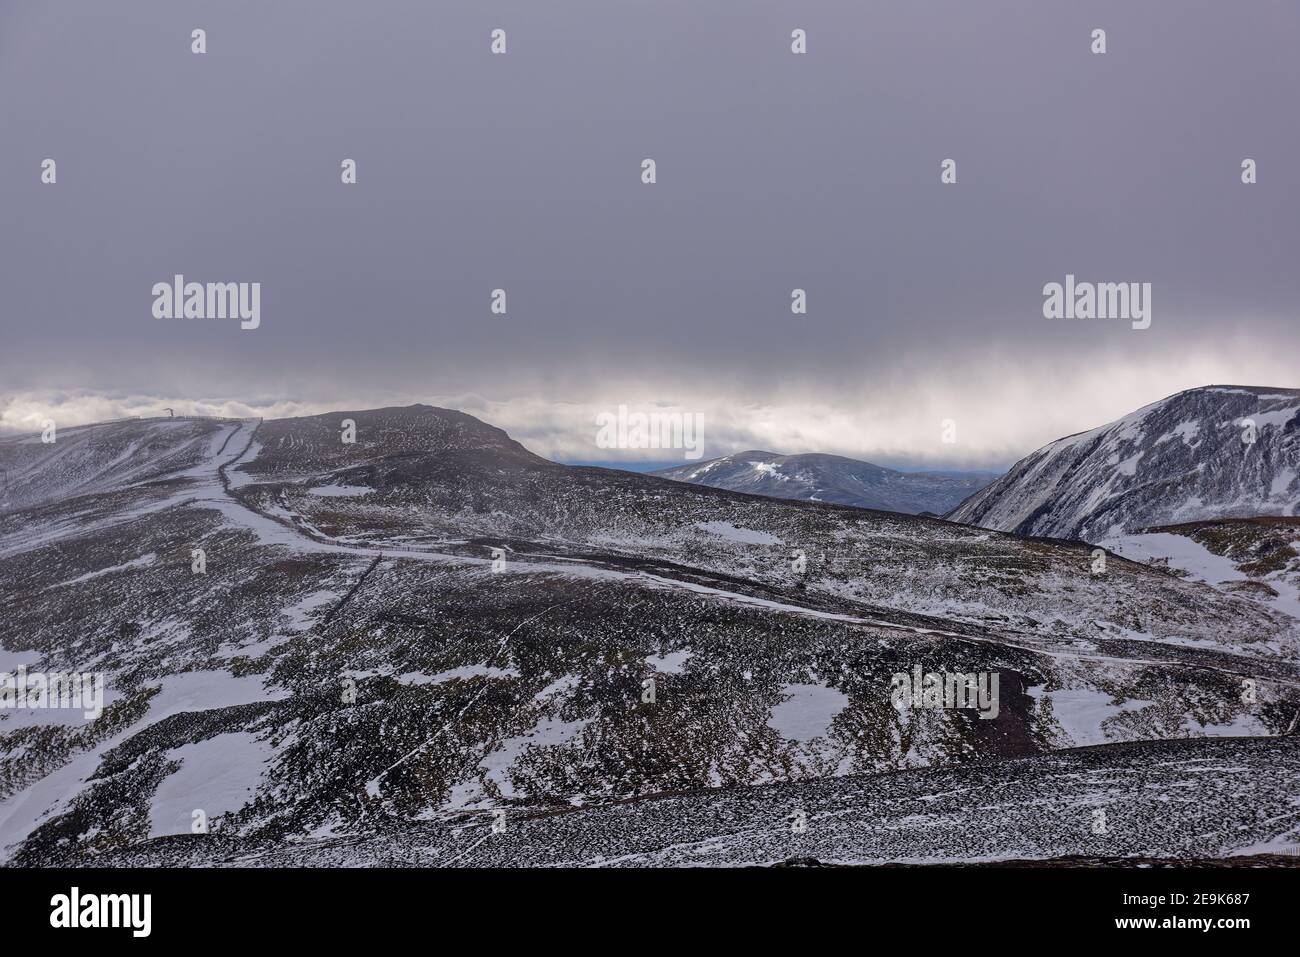 Looking across to the Ridgeline of Las Maol Mountain and the Mountains beyond at Glenshee, with a light snow covering on the slopes. Stock Photo